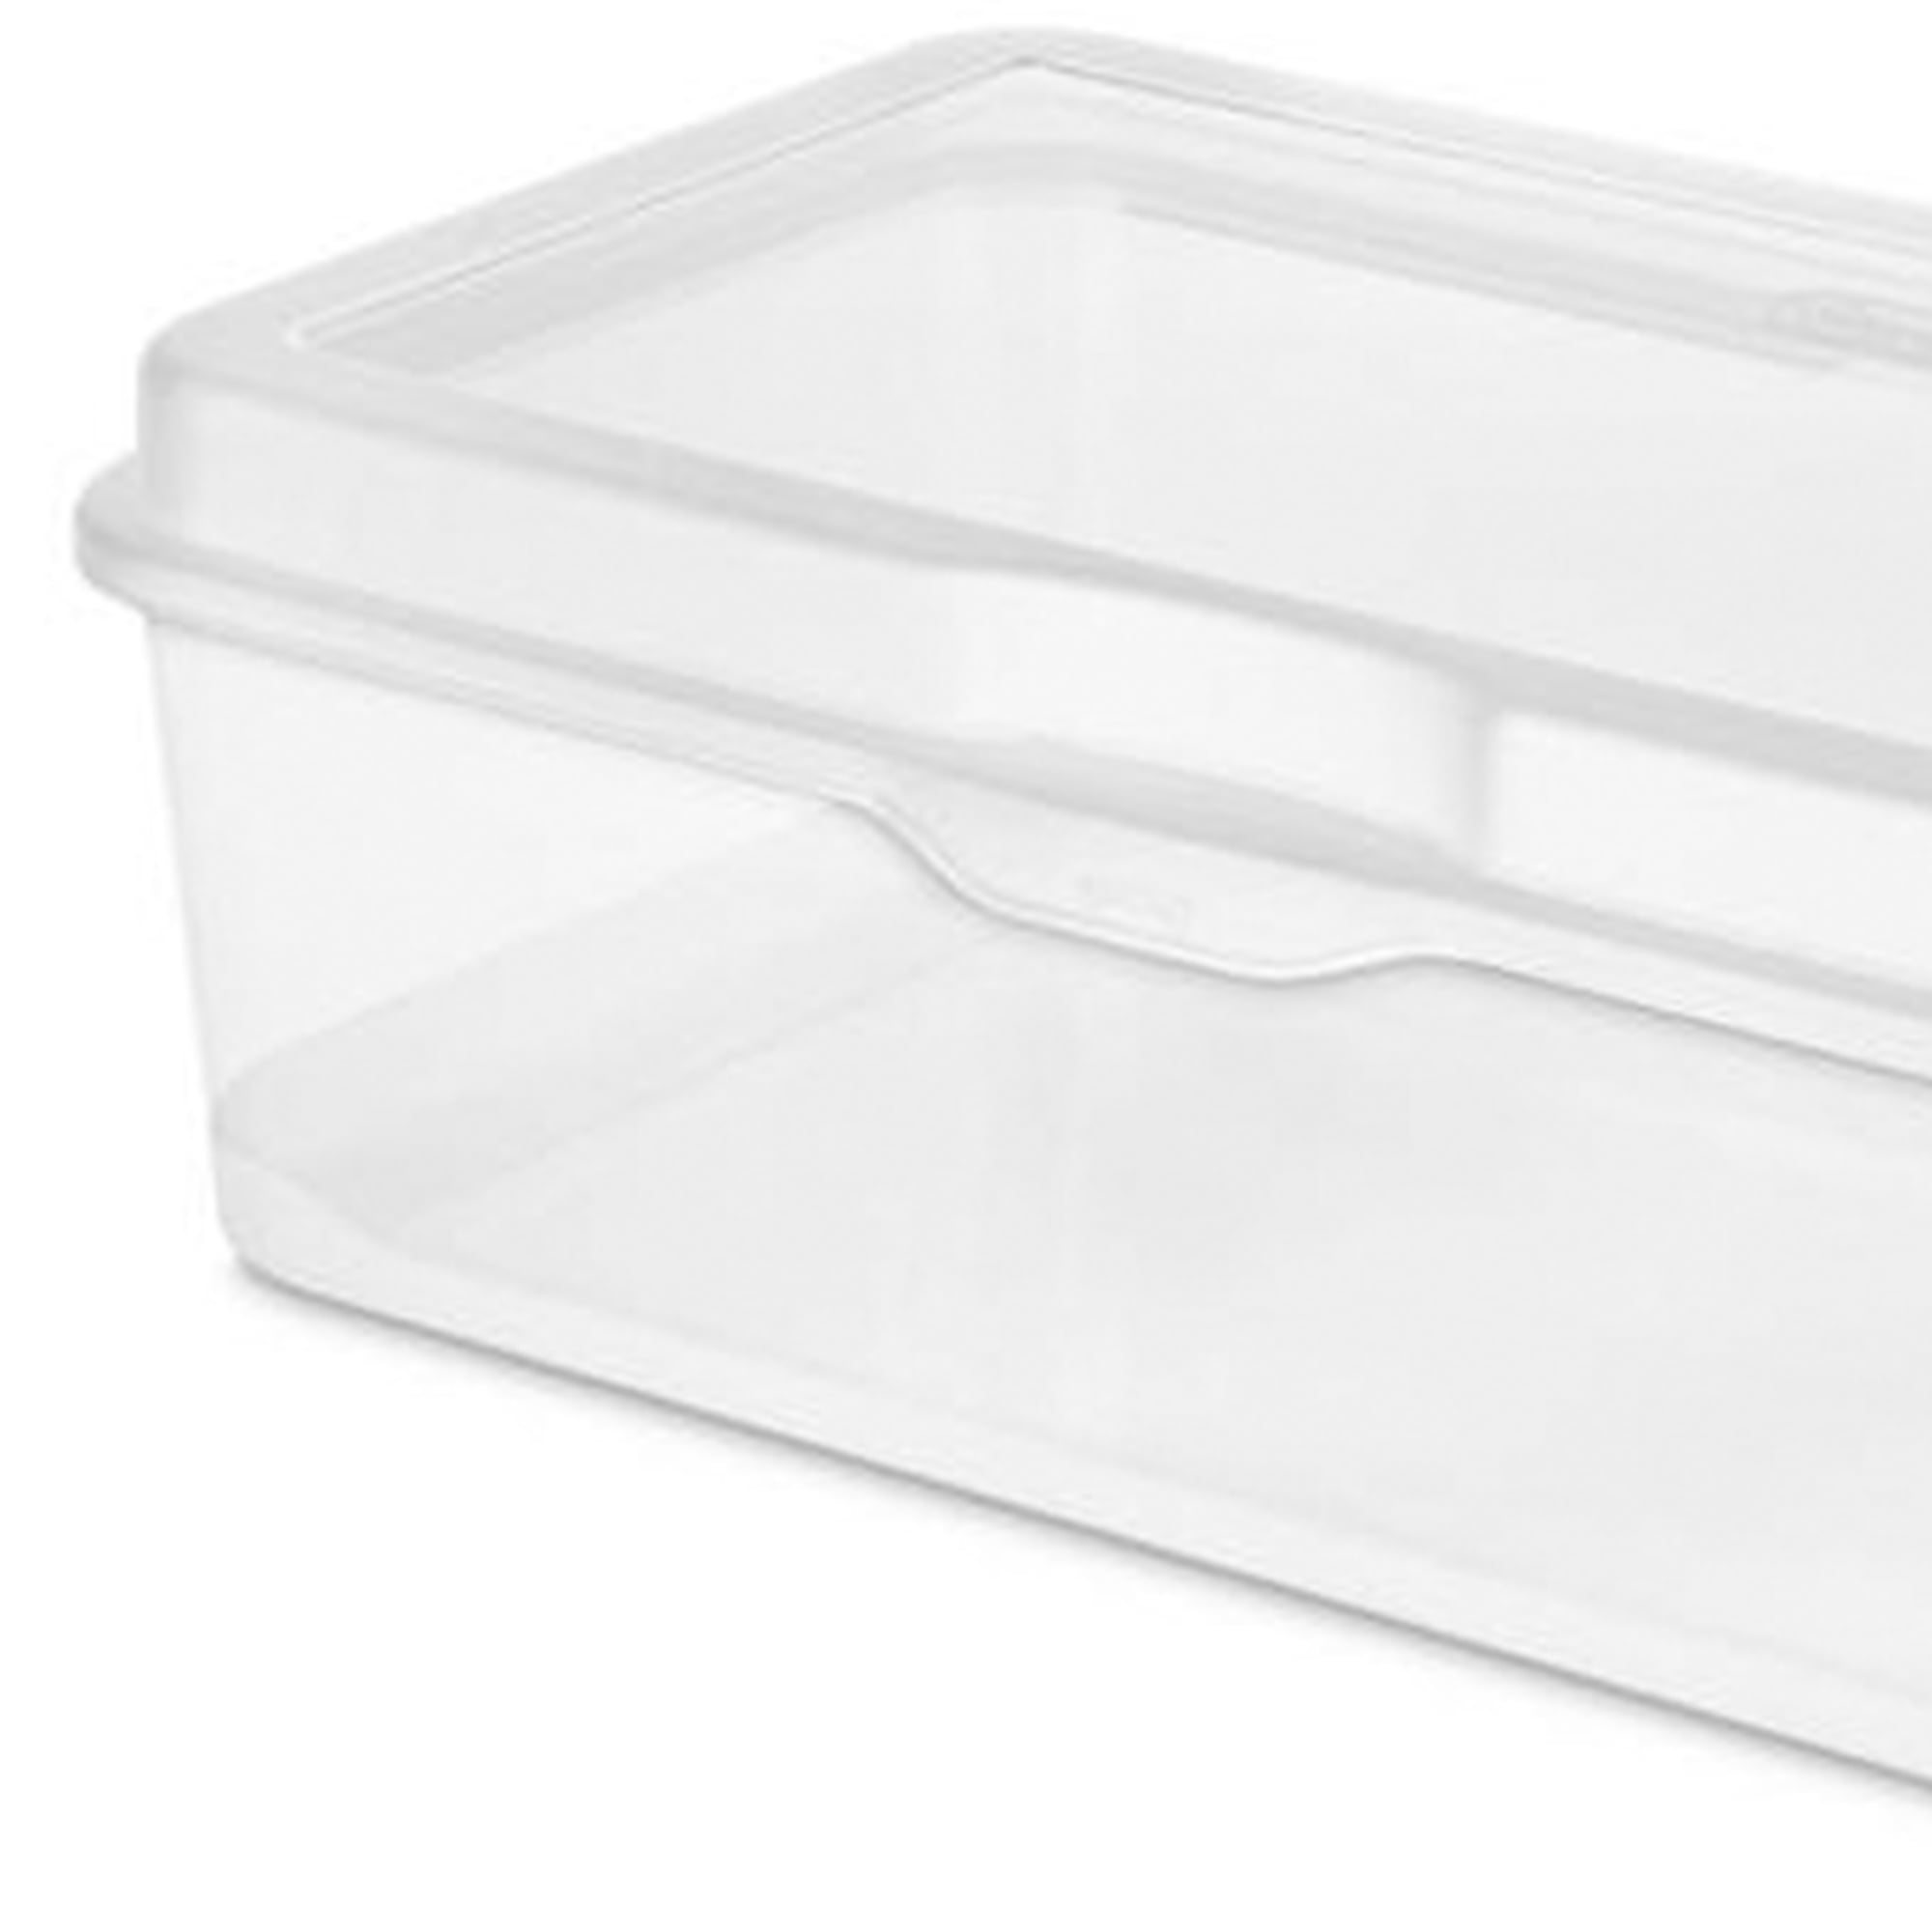 Sterilite 1.95 Gal. Plastic Flip Top Latching Storage Box Tote Container in  Clear (42-Pack) 42 x 18058606 - The Home Depot